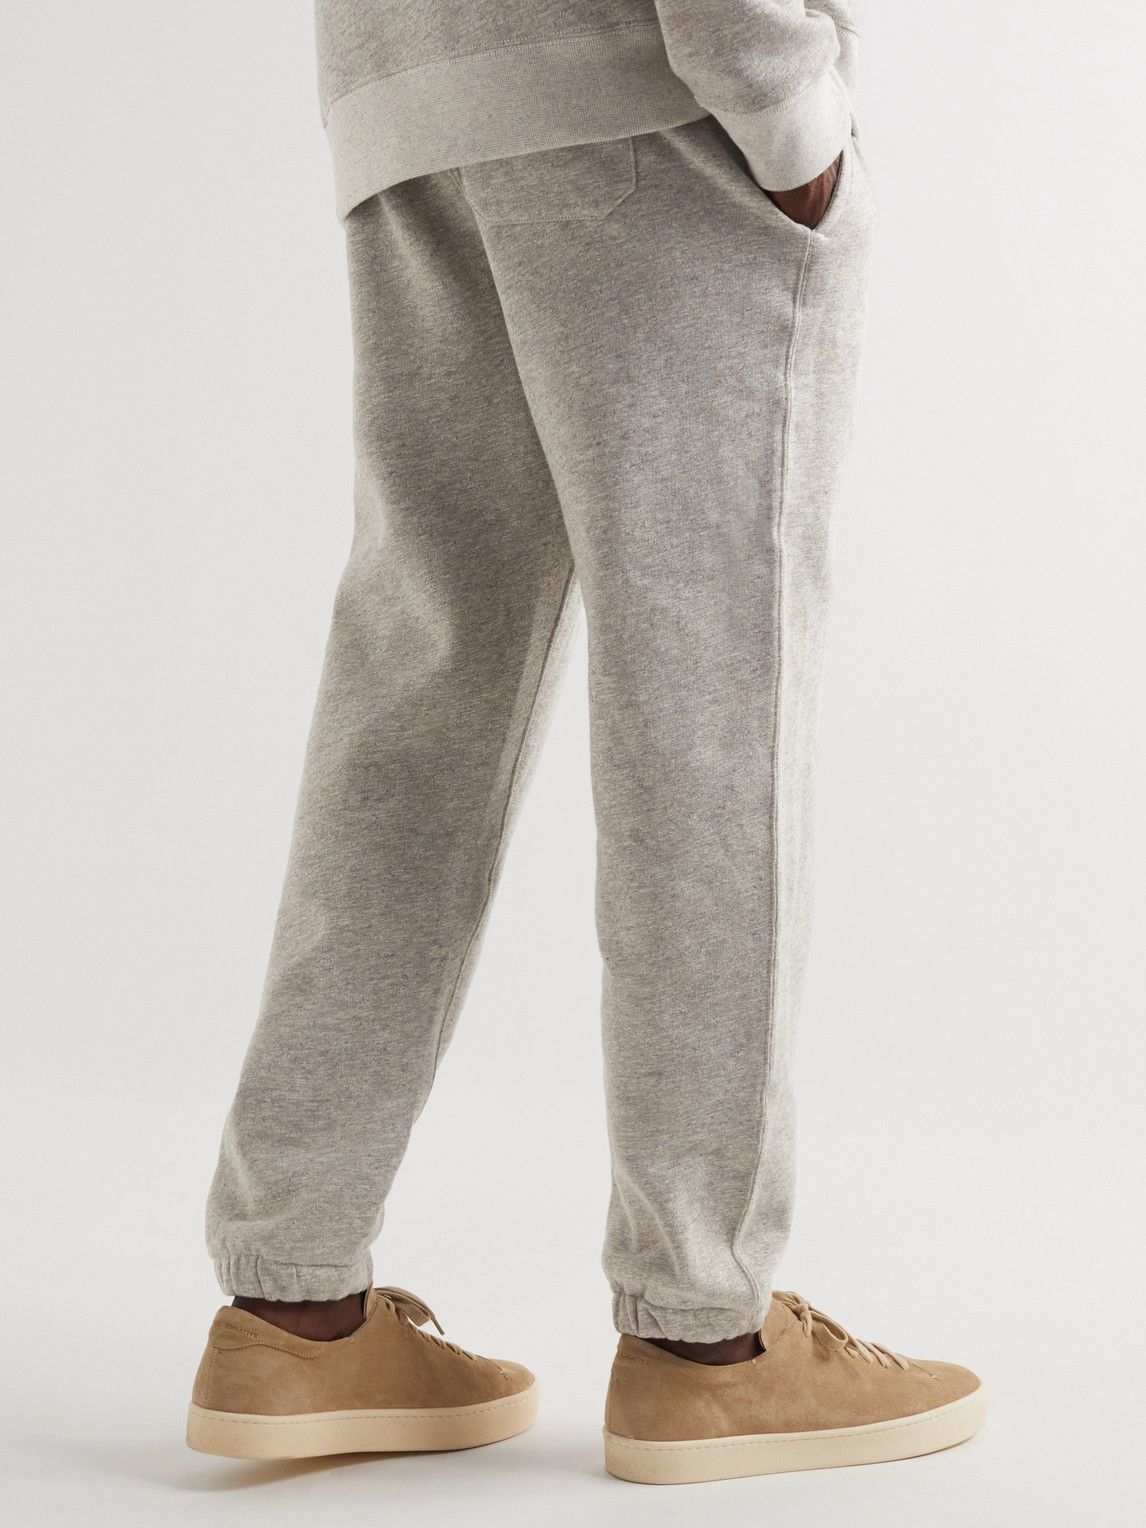 Polo Ralph Lauren - Chariots of Fire Tapered Cotton-Blend Jersey Sweatpants - Gray